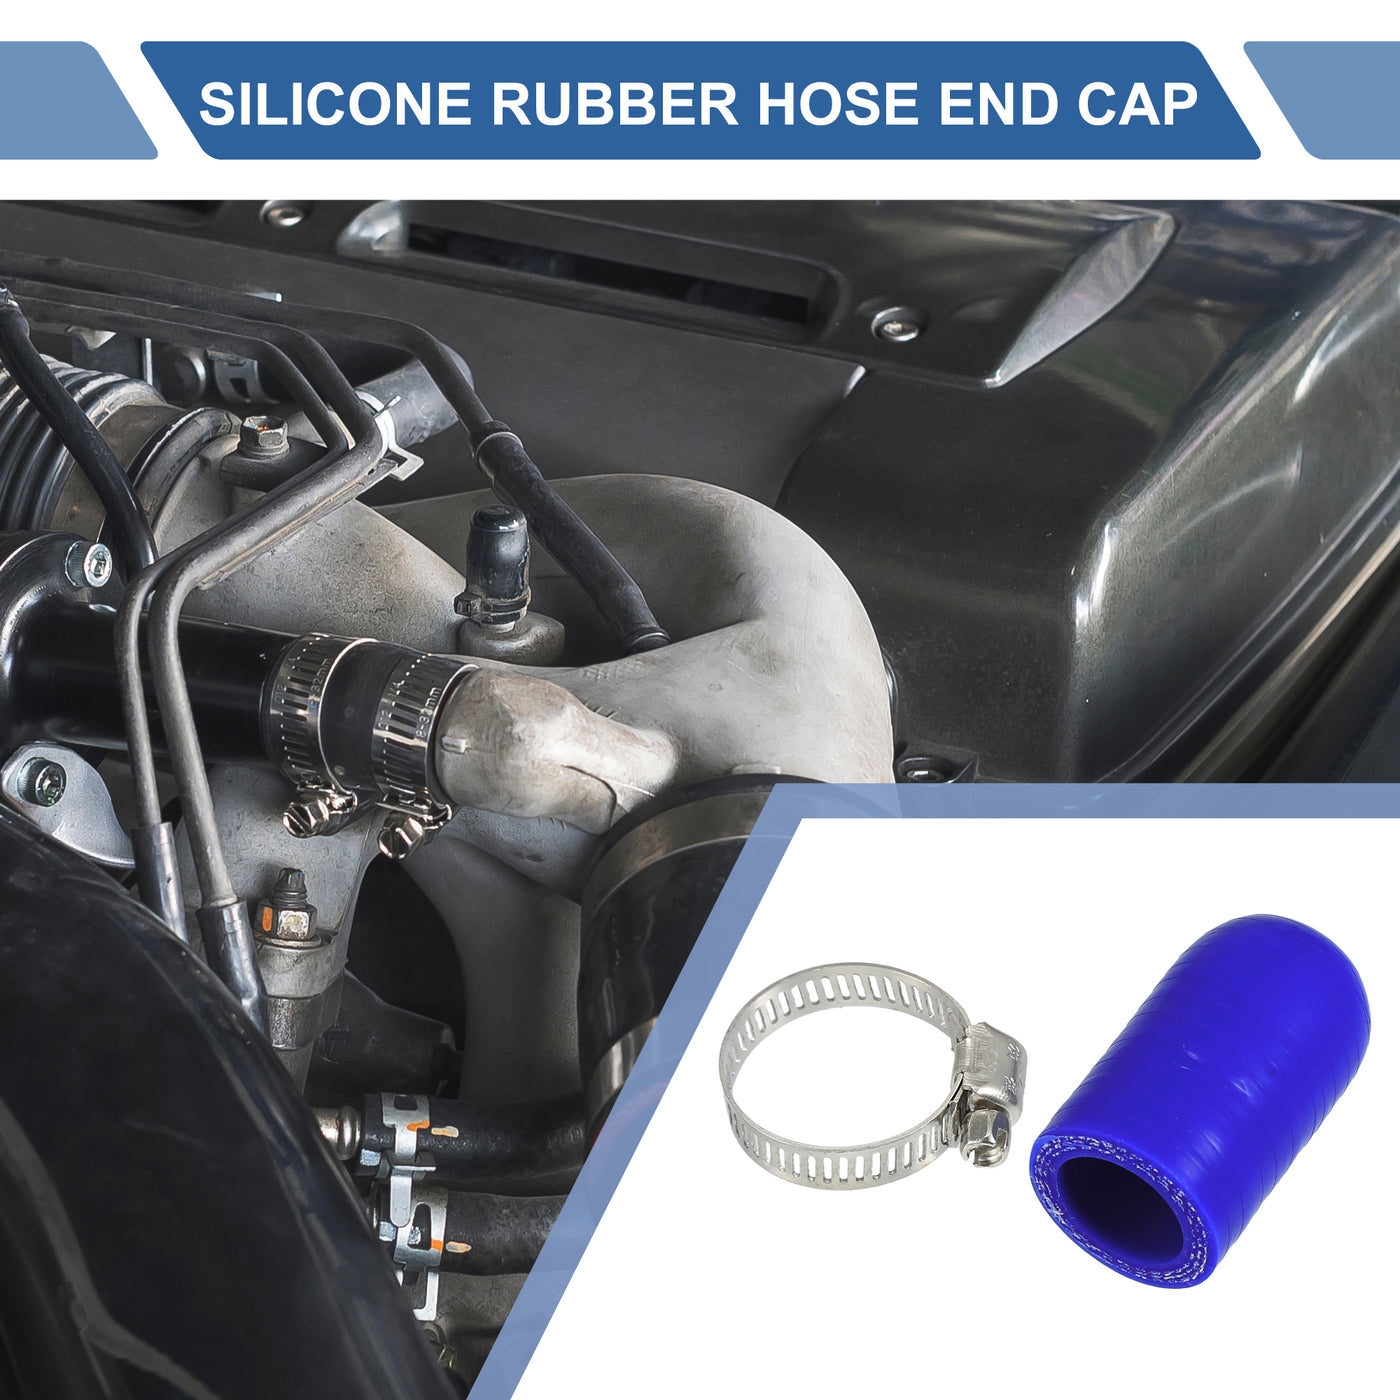 X AUTOHAUX 1 Set 30mm Length 18mm/0.71" ID Blue Car Silicone Rubber Hose End Cap with Clamps Silicone Reinforced Blanking Cap for Bypass Tube Universal